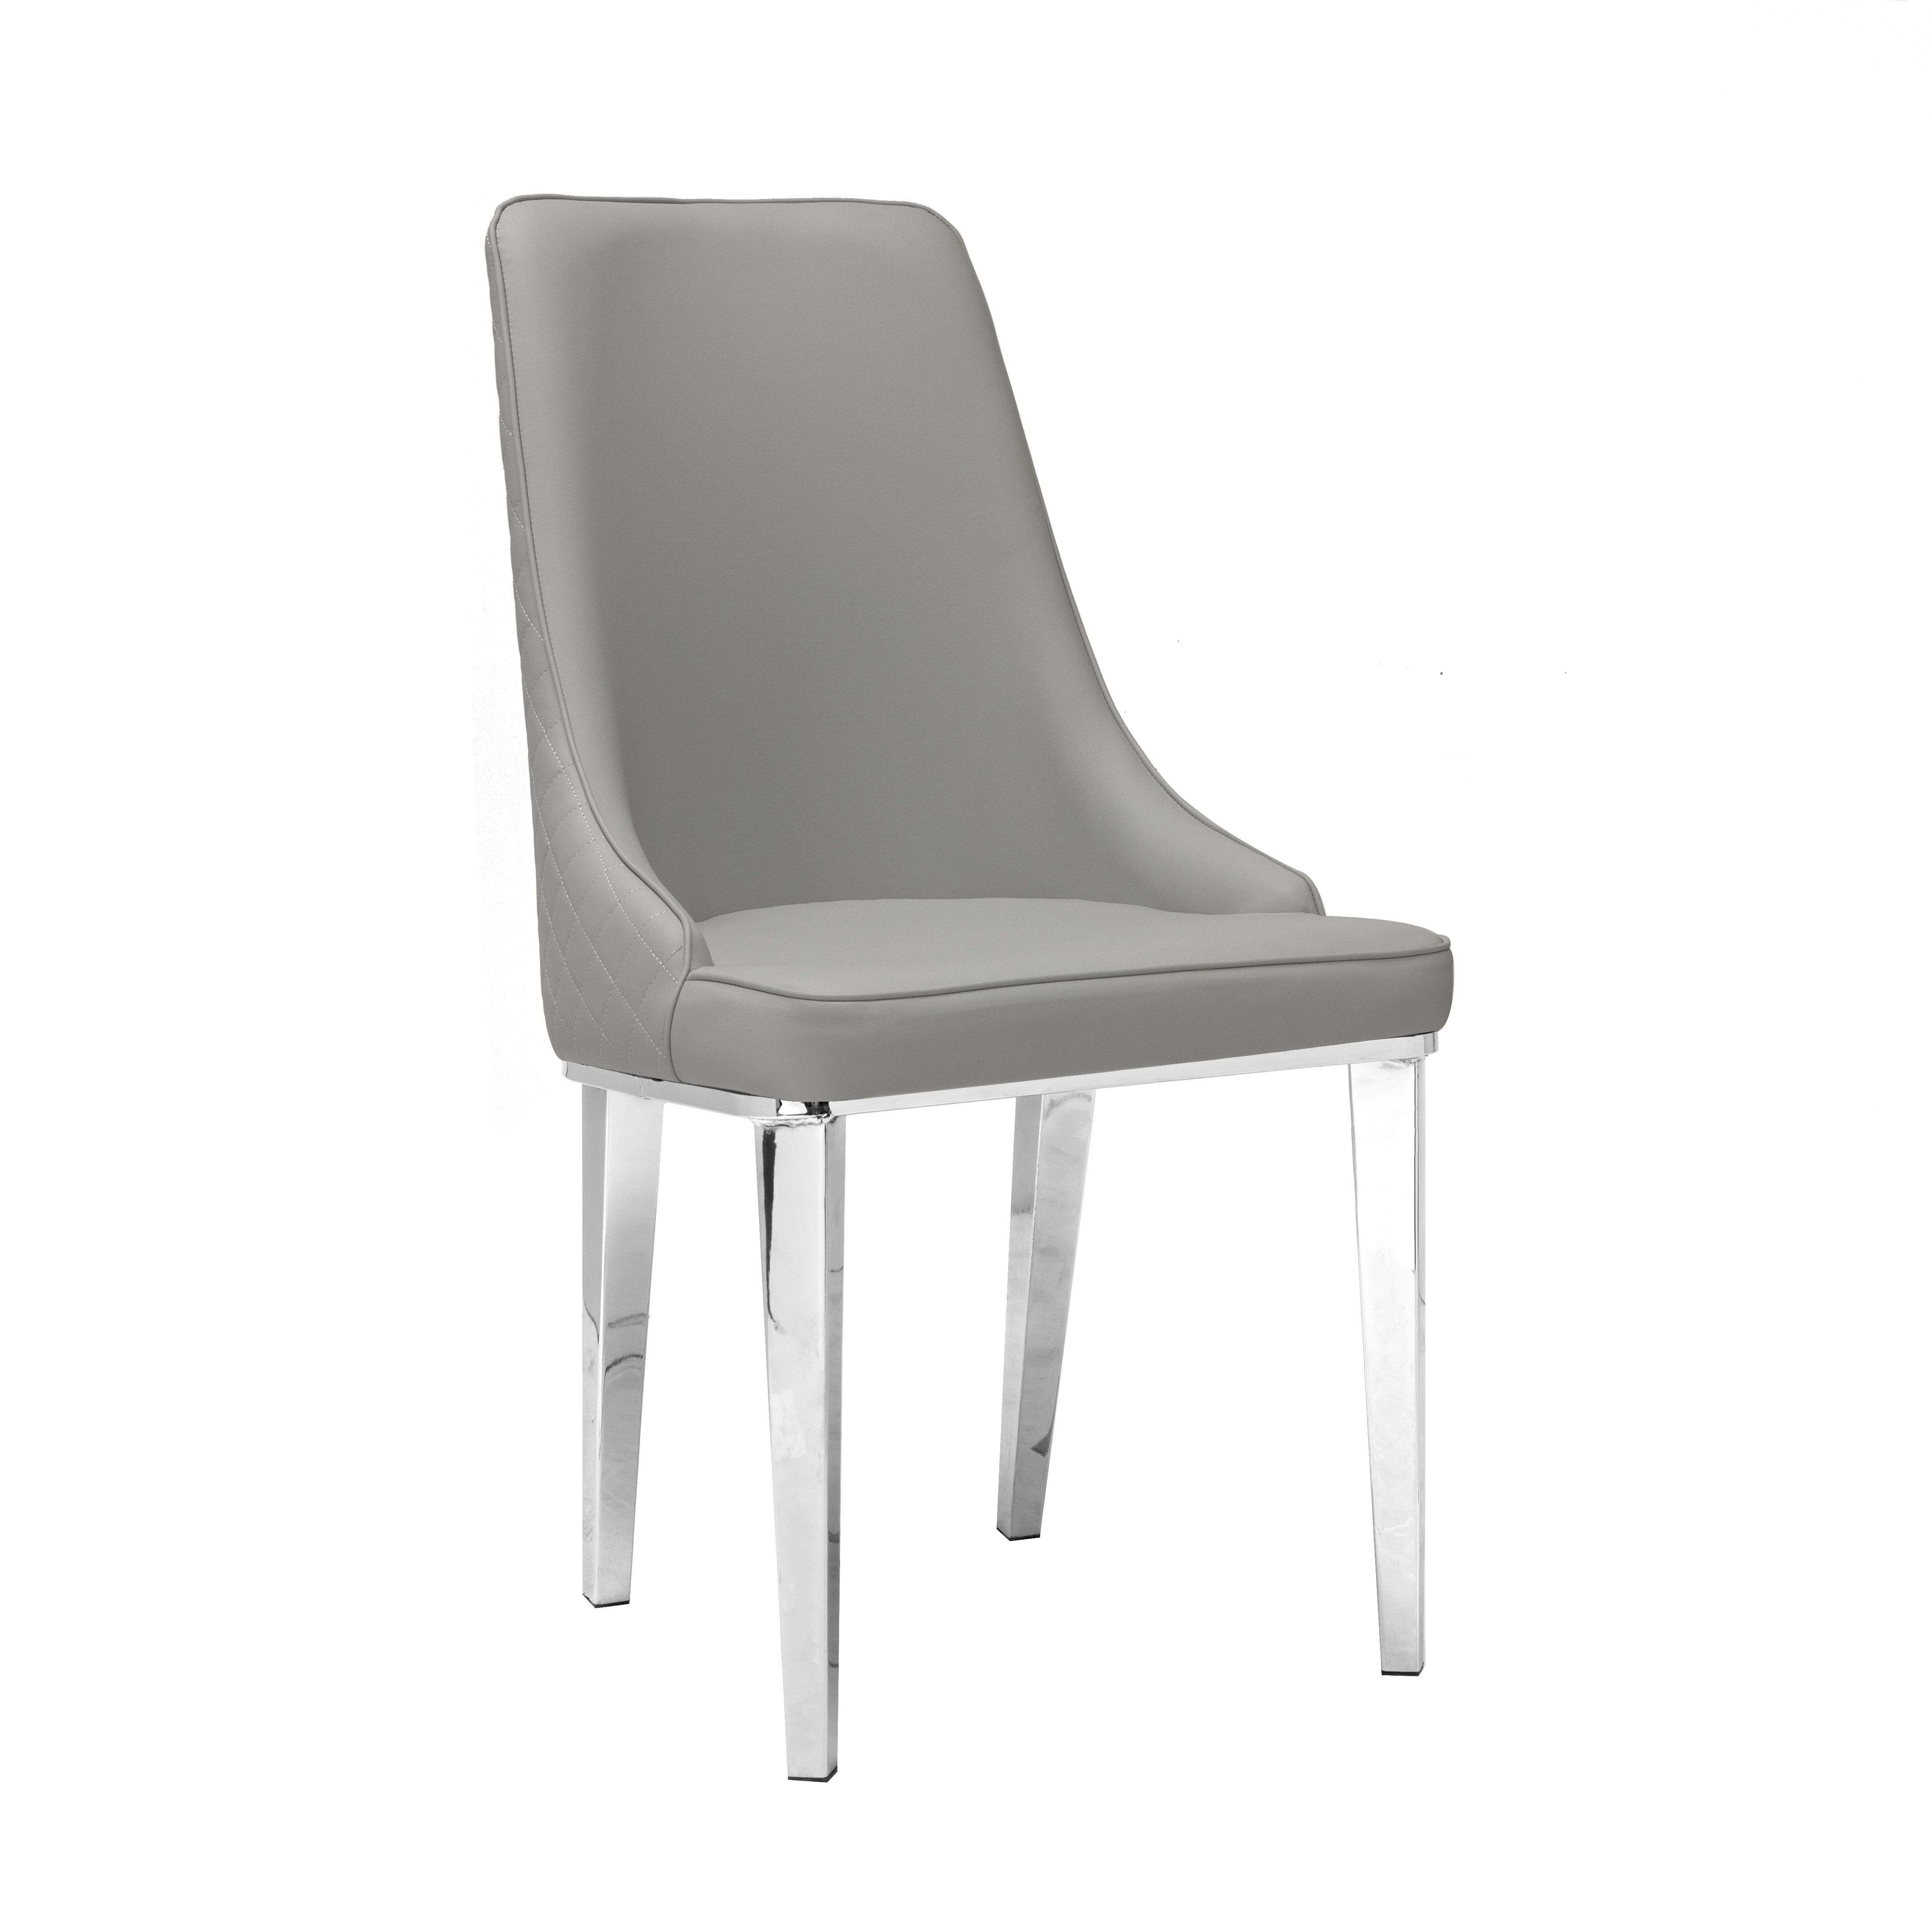 Baudelaire Grey Leatherette Chair